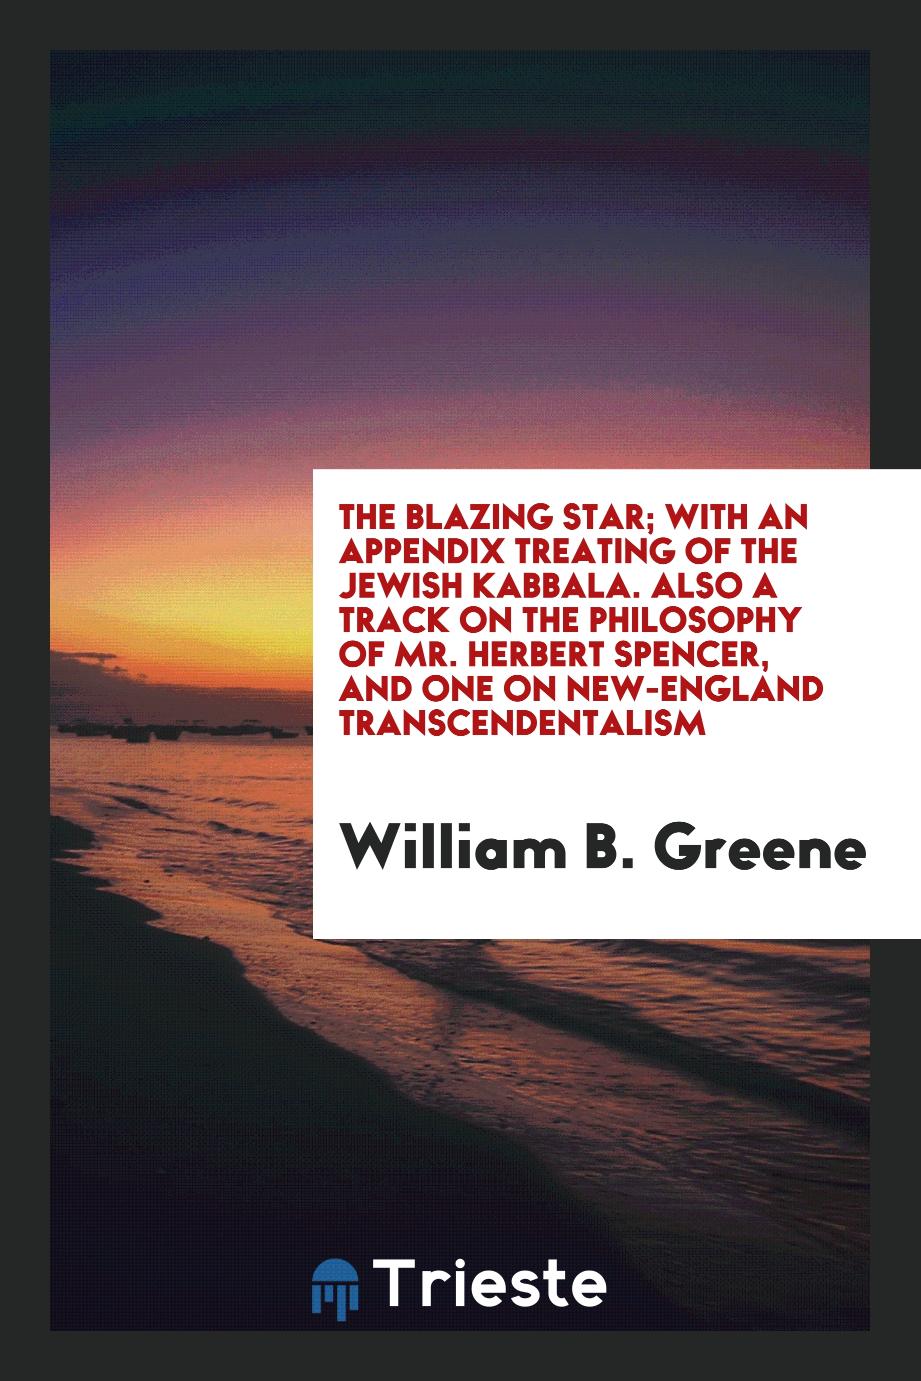 The Blazing Star; With an Appendix Treating of the Jewish Kabbala. Also a Track on the Philosophy of Mr. Herbert Spencer, and One on New-England Transcendentalism